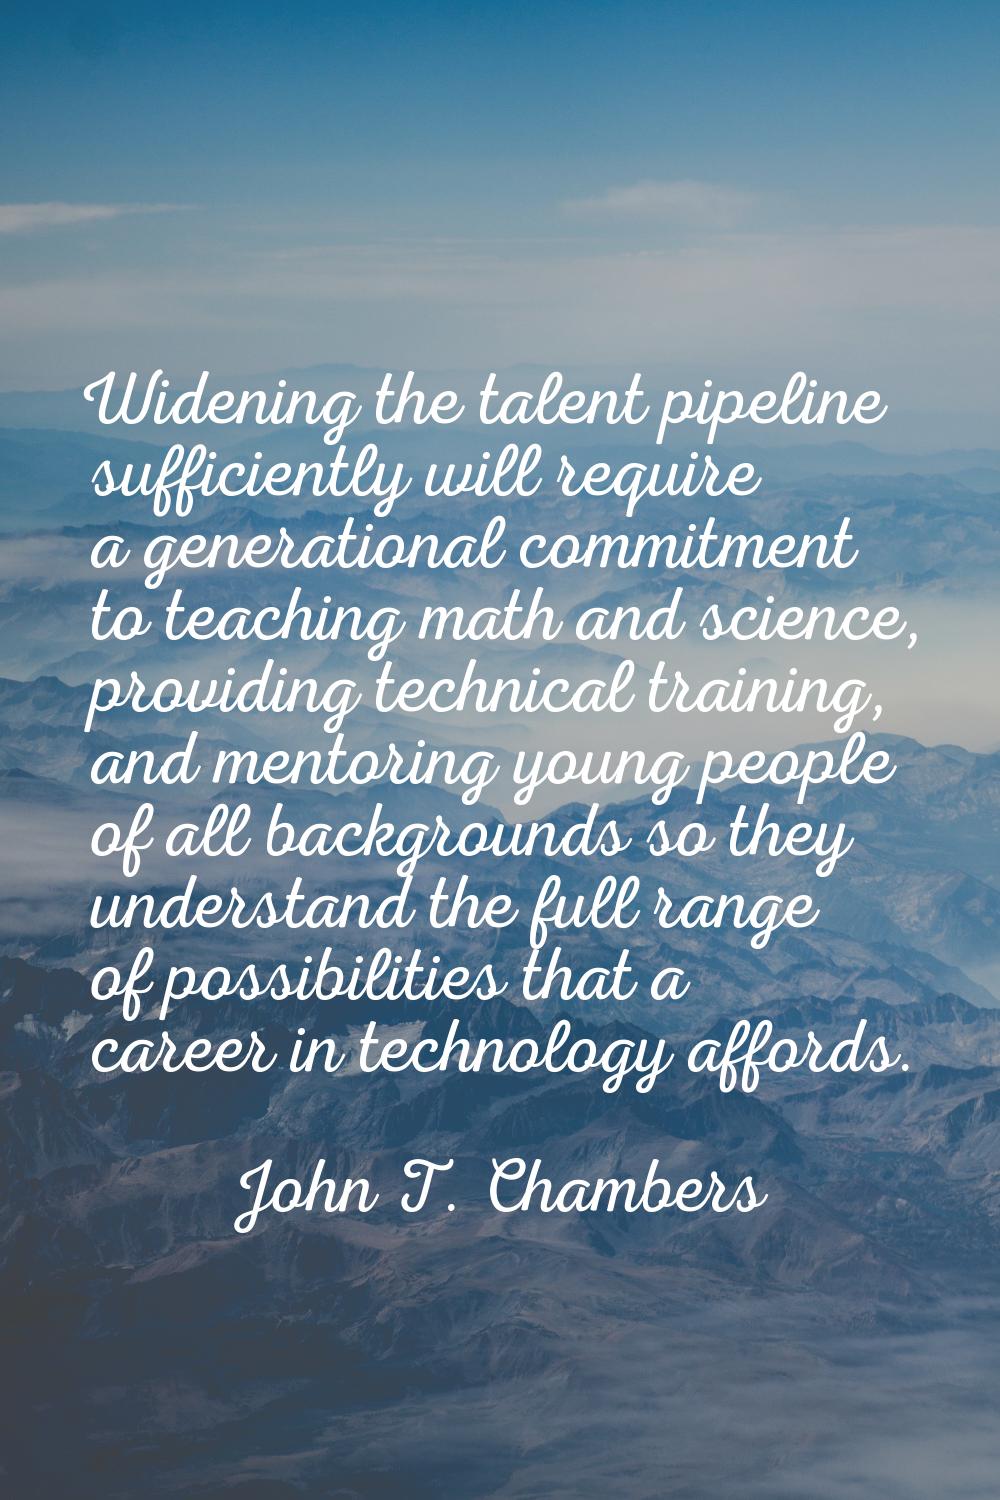 Widening the talent pipeline sufficiently will require a generational commitment to teaching math a